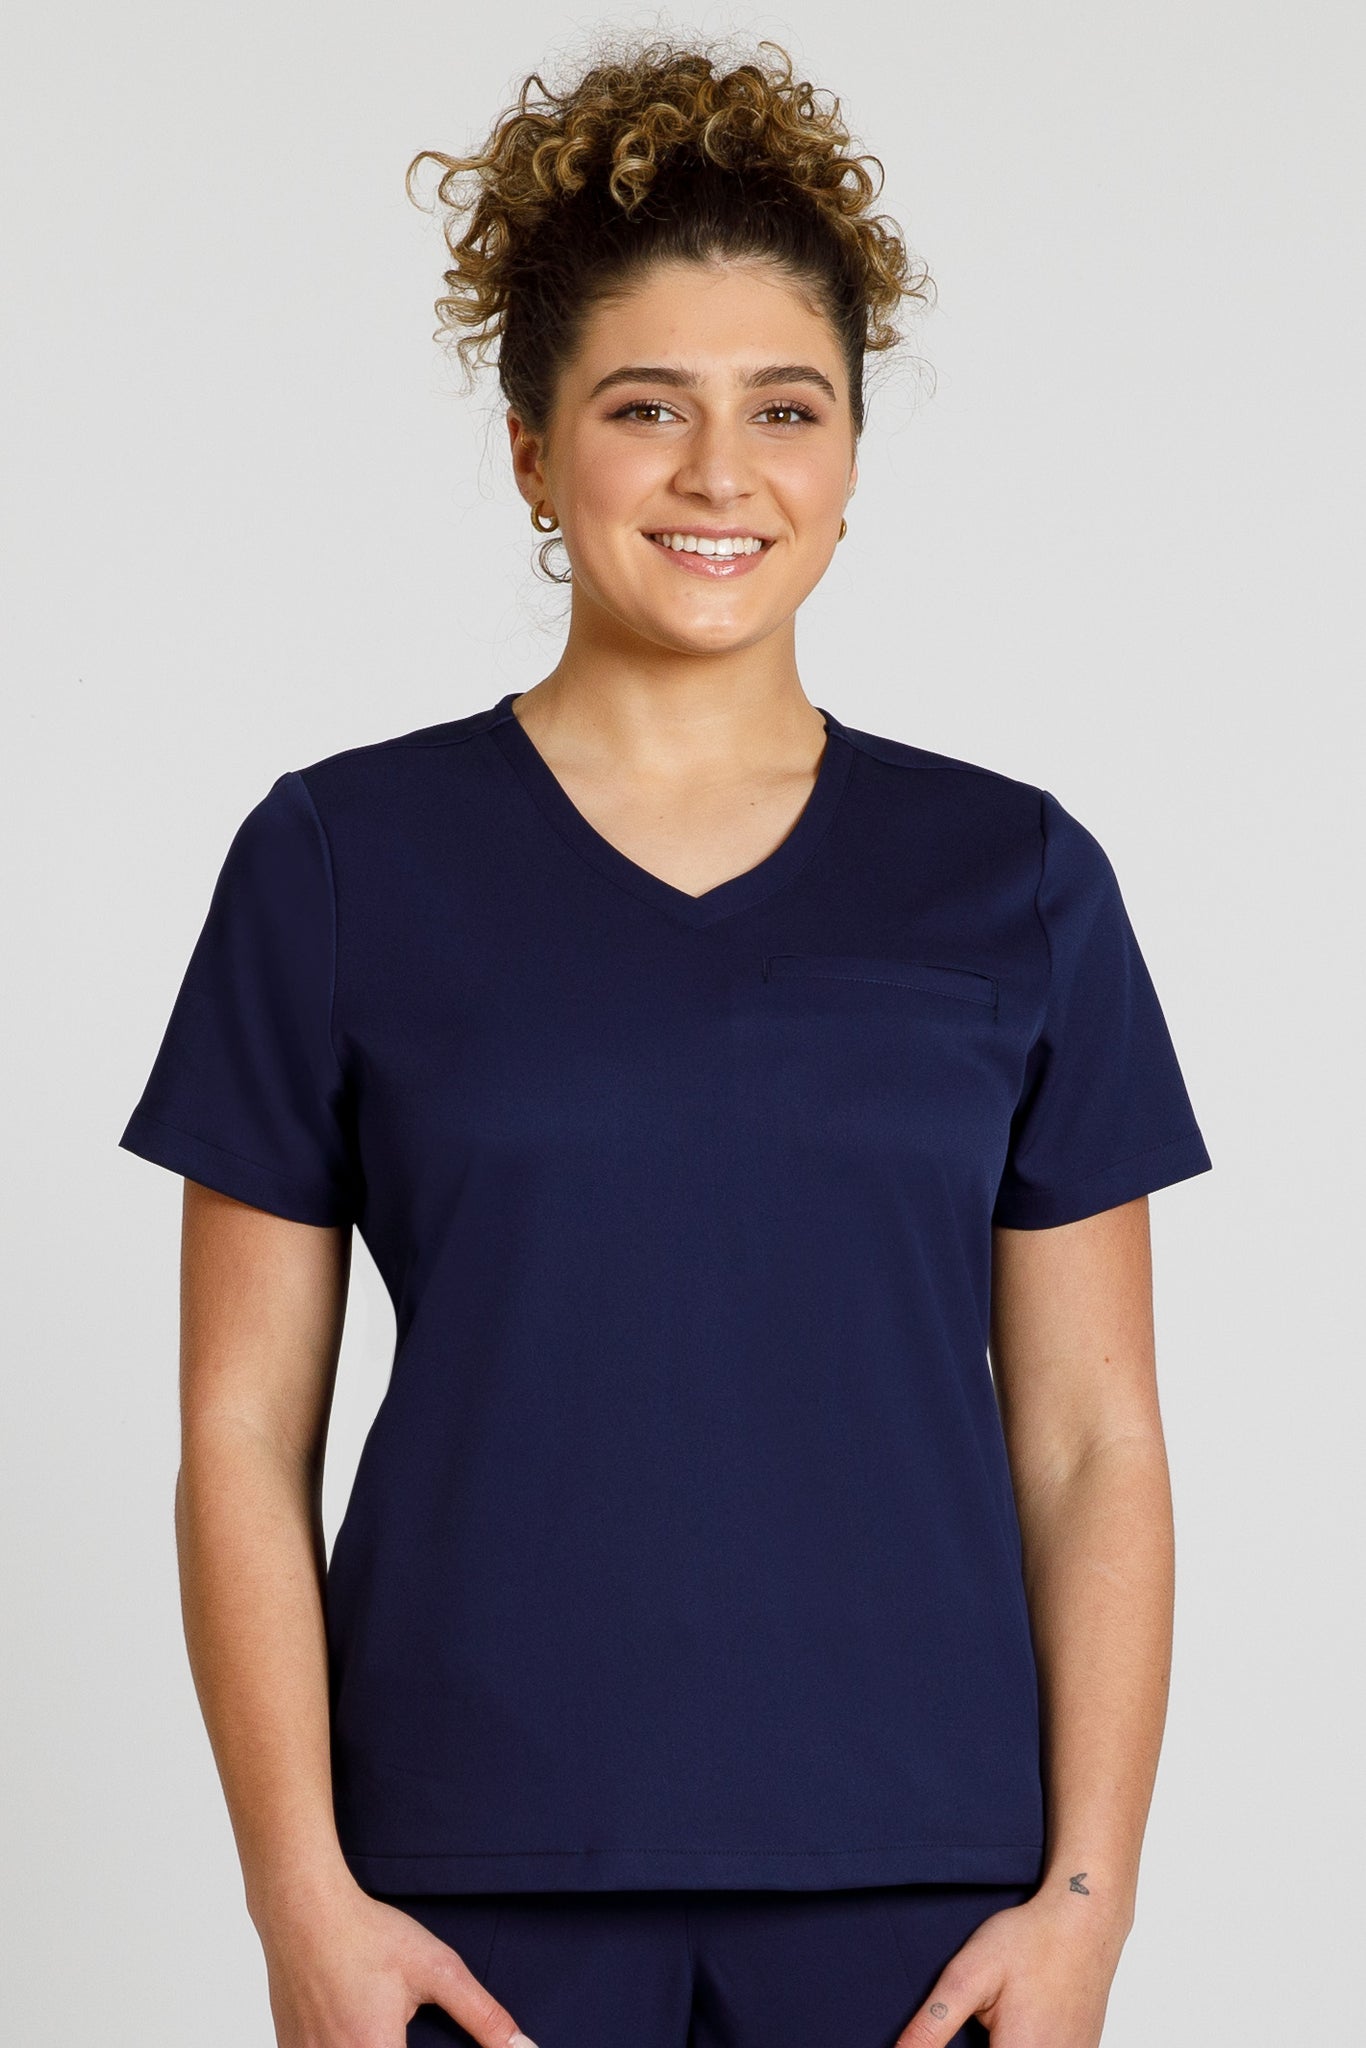 Women's Scrub Tops  100% Recycled - Sustainable Scrubs